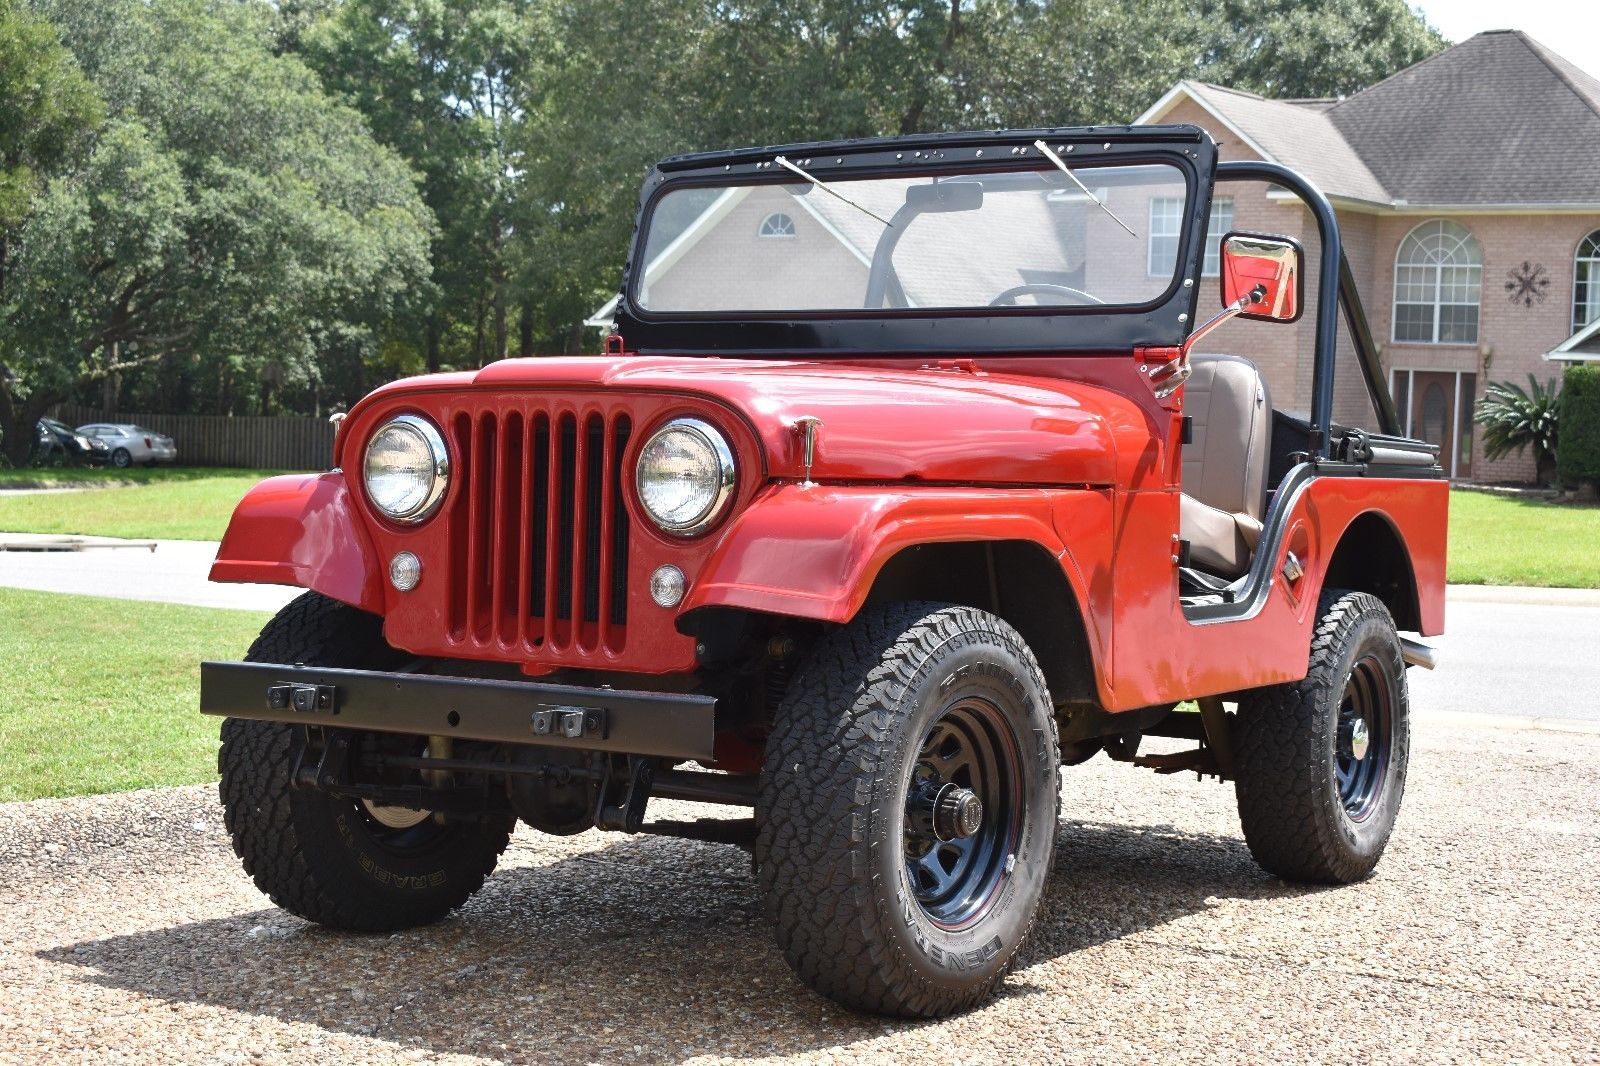 customized 1961 Willys CJ5 monster truck for sale